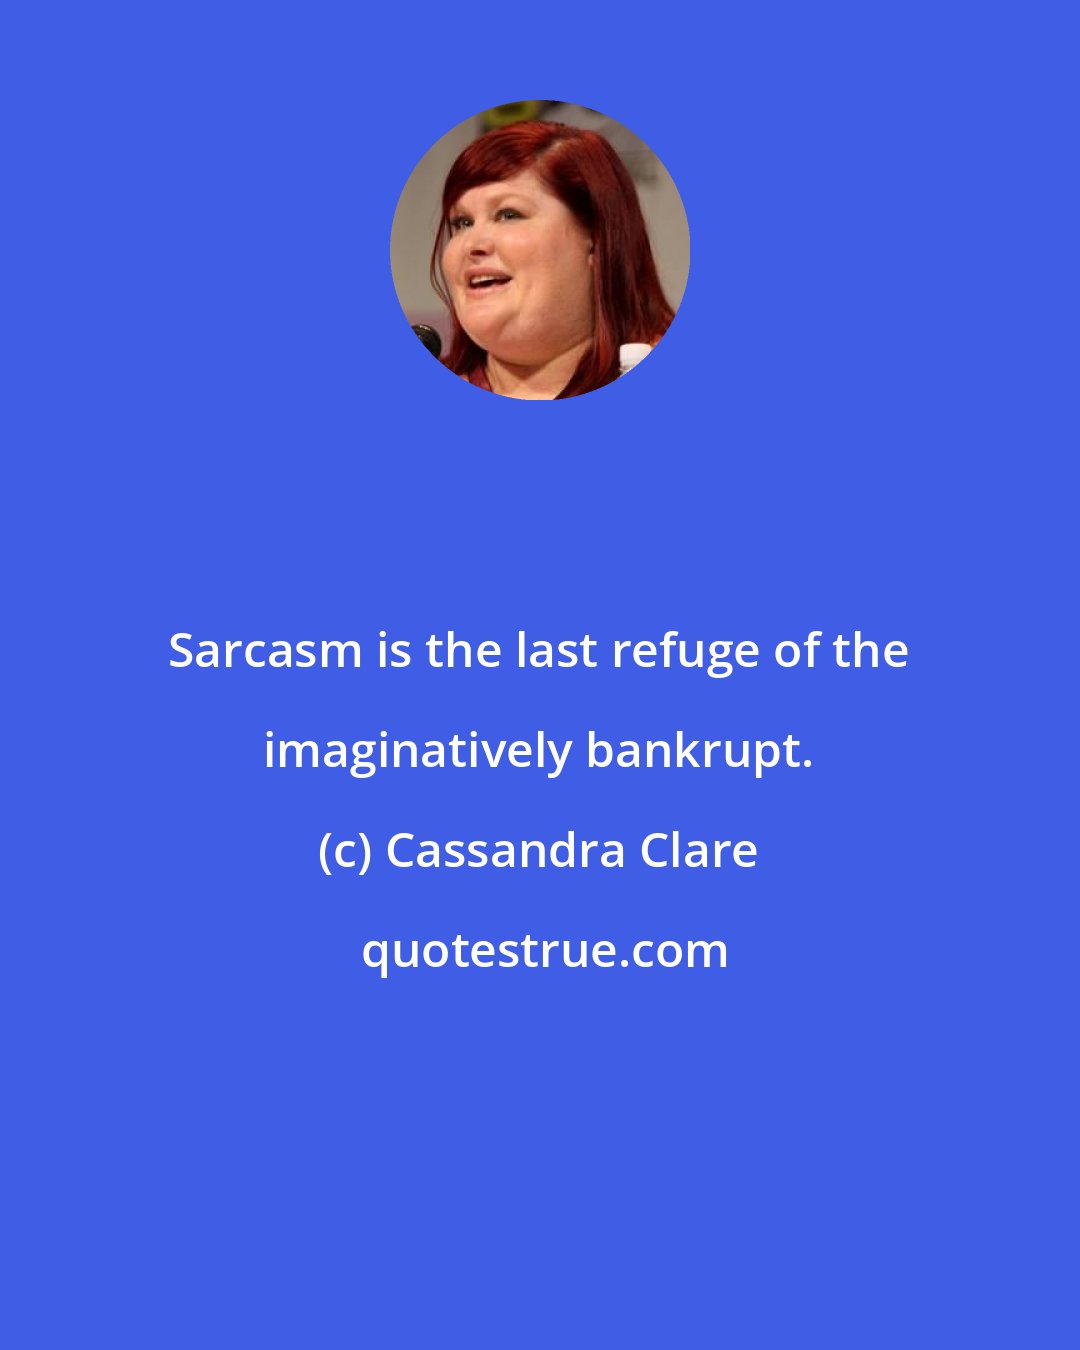 Cassandra Clare: Sarcasm is the last refuge of the imaginatively bankrupt.